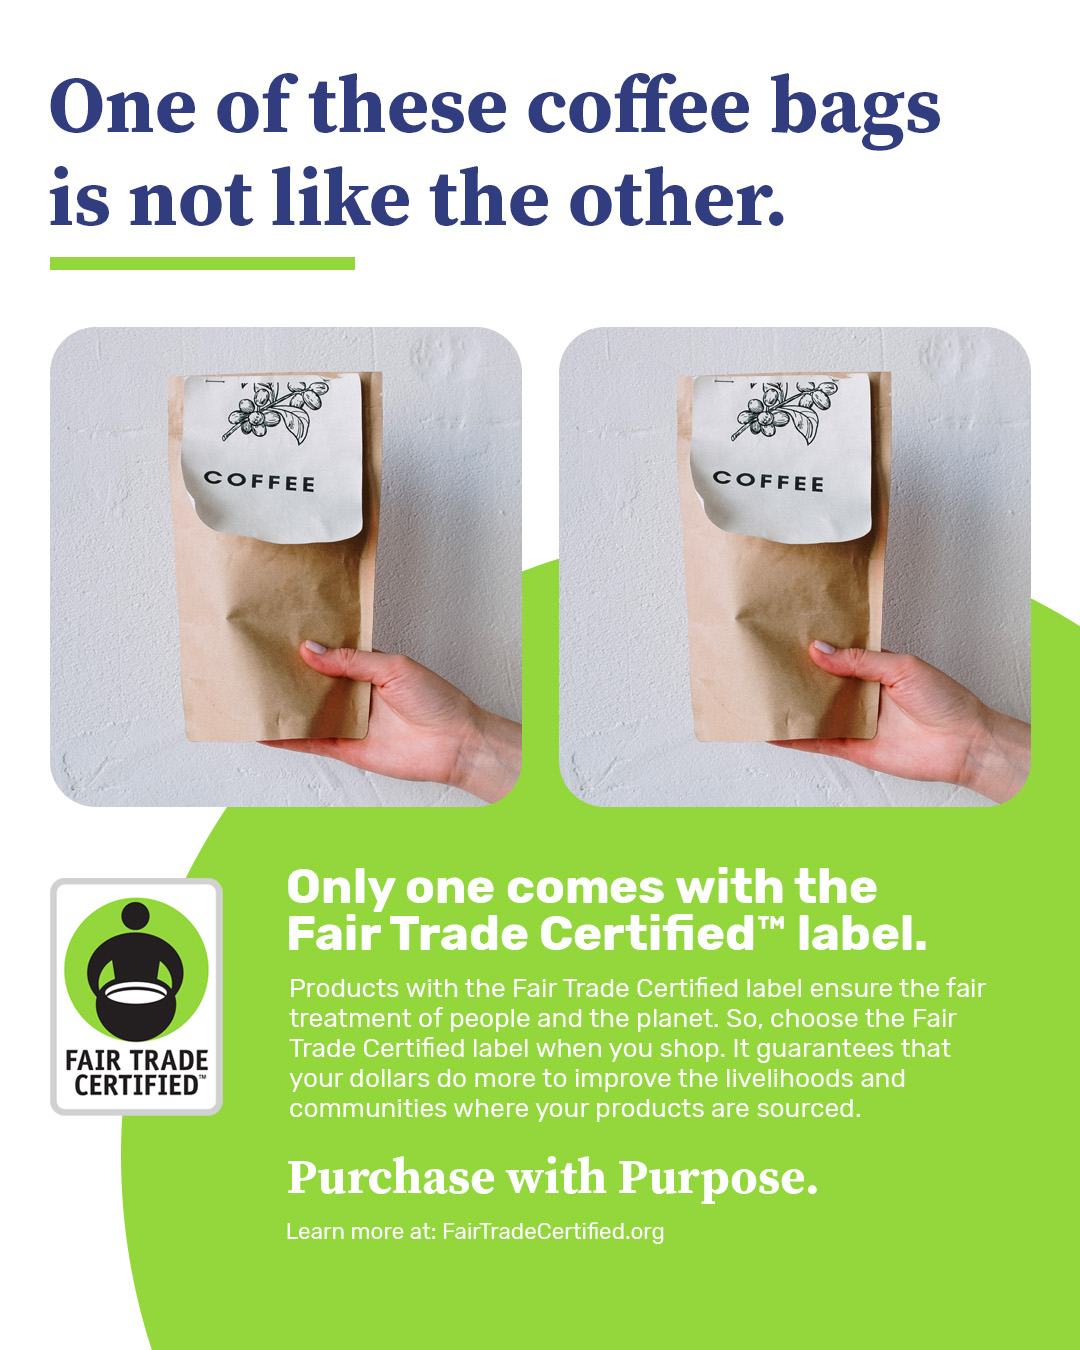 An ad from Fair Trade Certified's 'Purchase With Purpose' campaign that shows two identical photos of a coffee bag, but explains that one is not like the other because one features the Fair Trade Certified label.